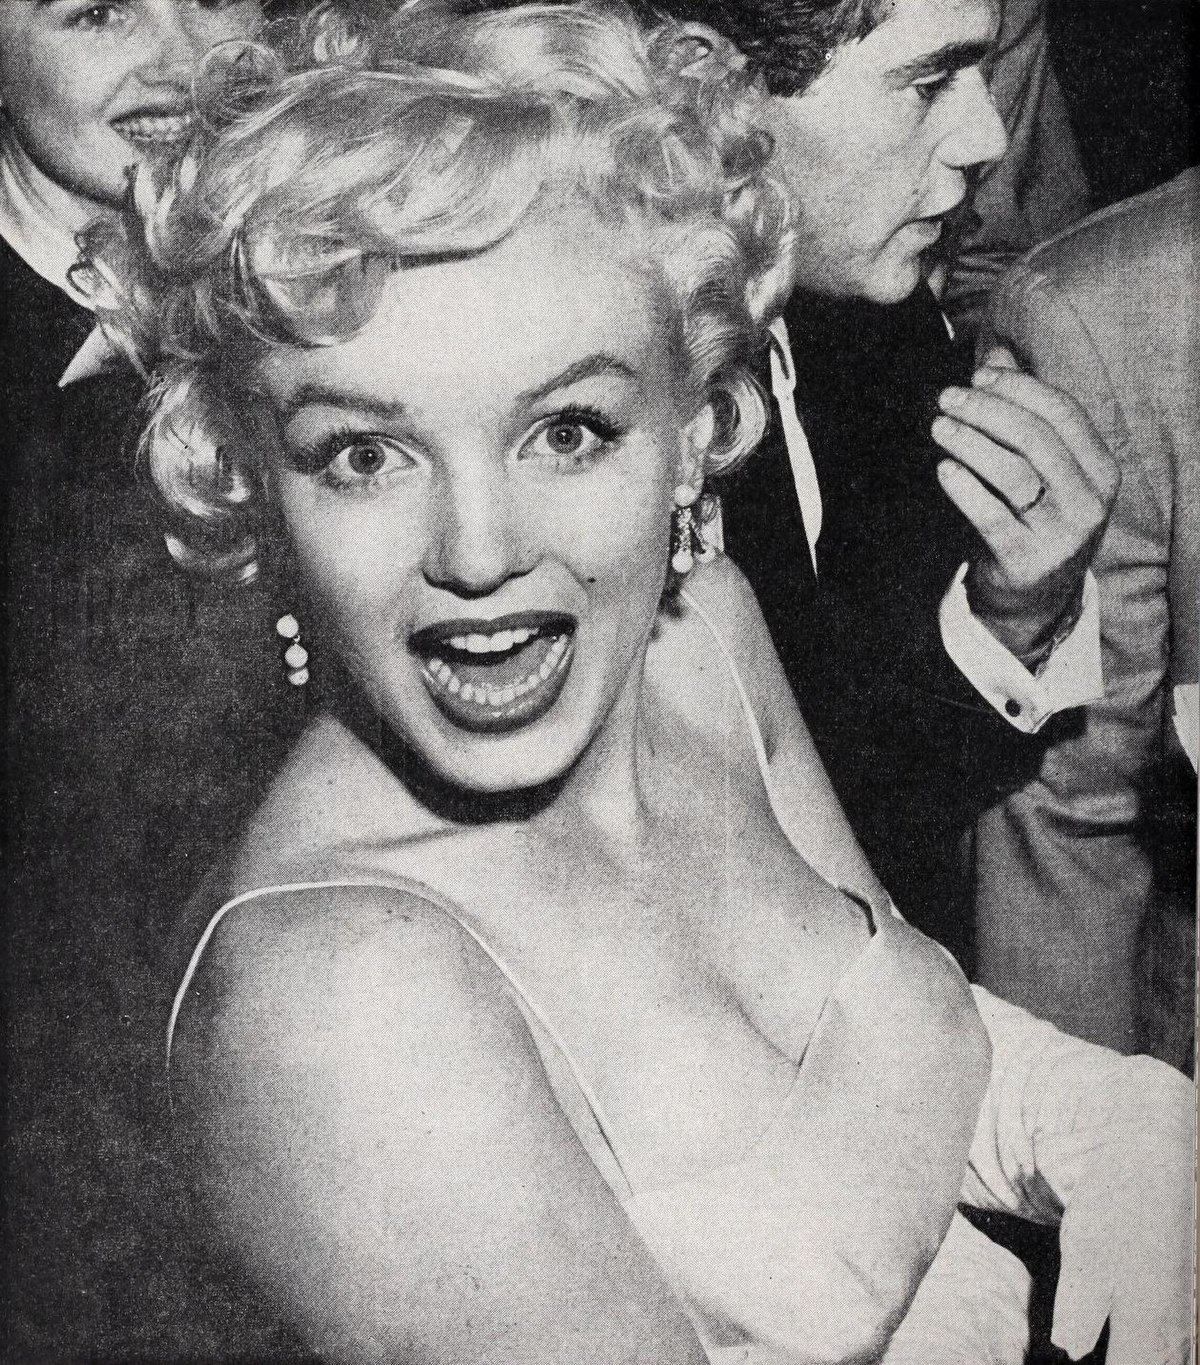 File:Marilyn Monroe at a party, 1955.jpg - Wikimedia Commons